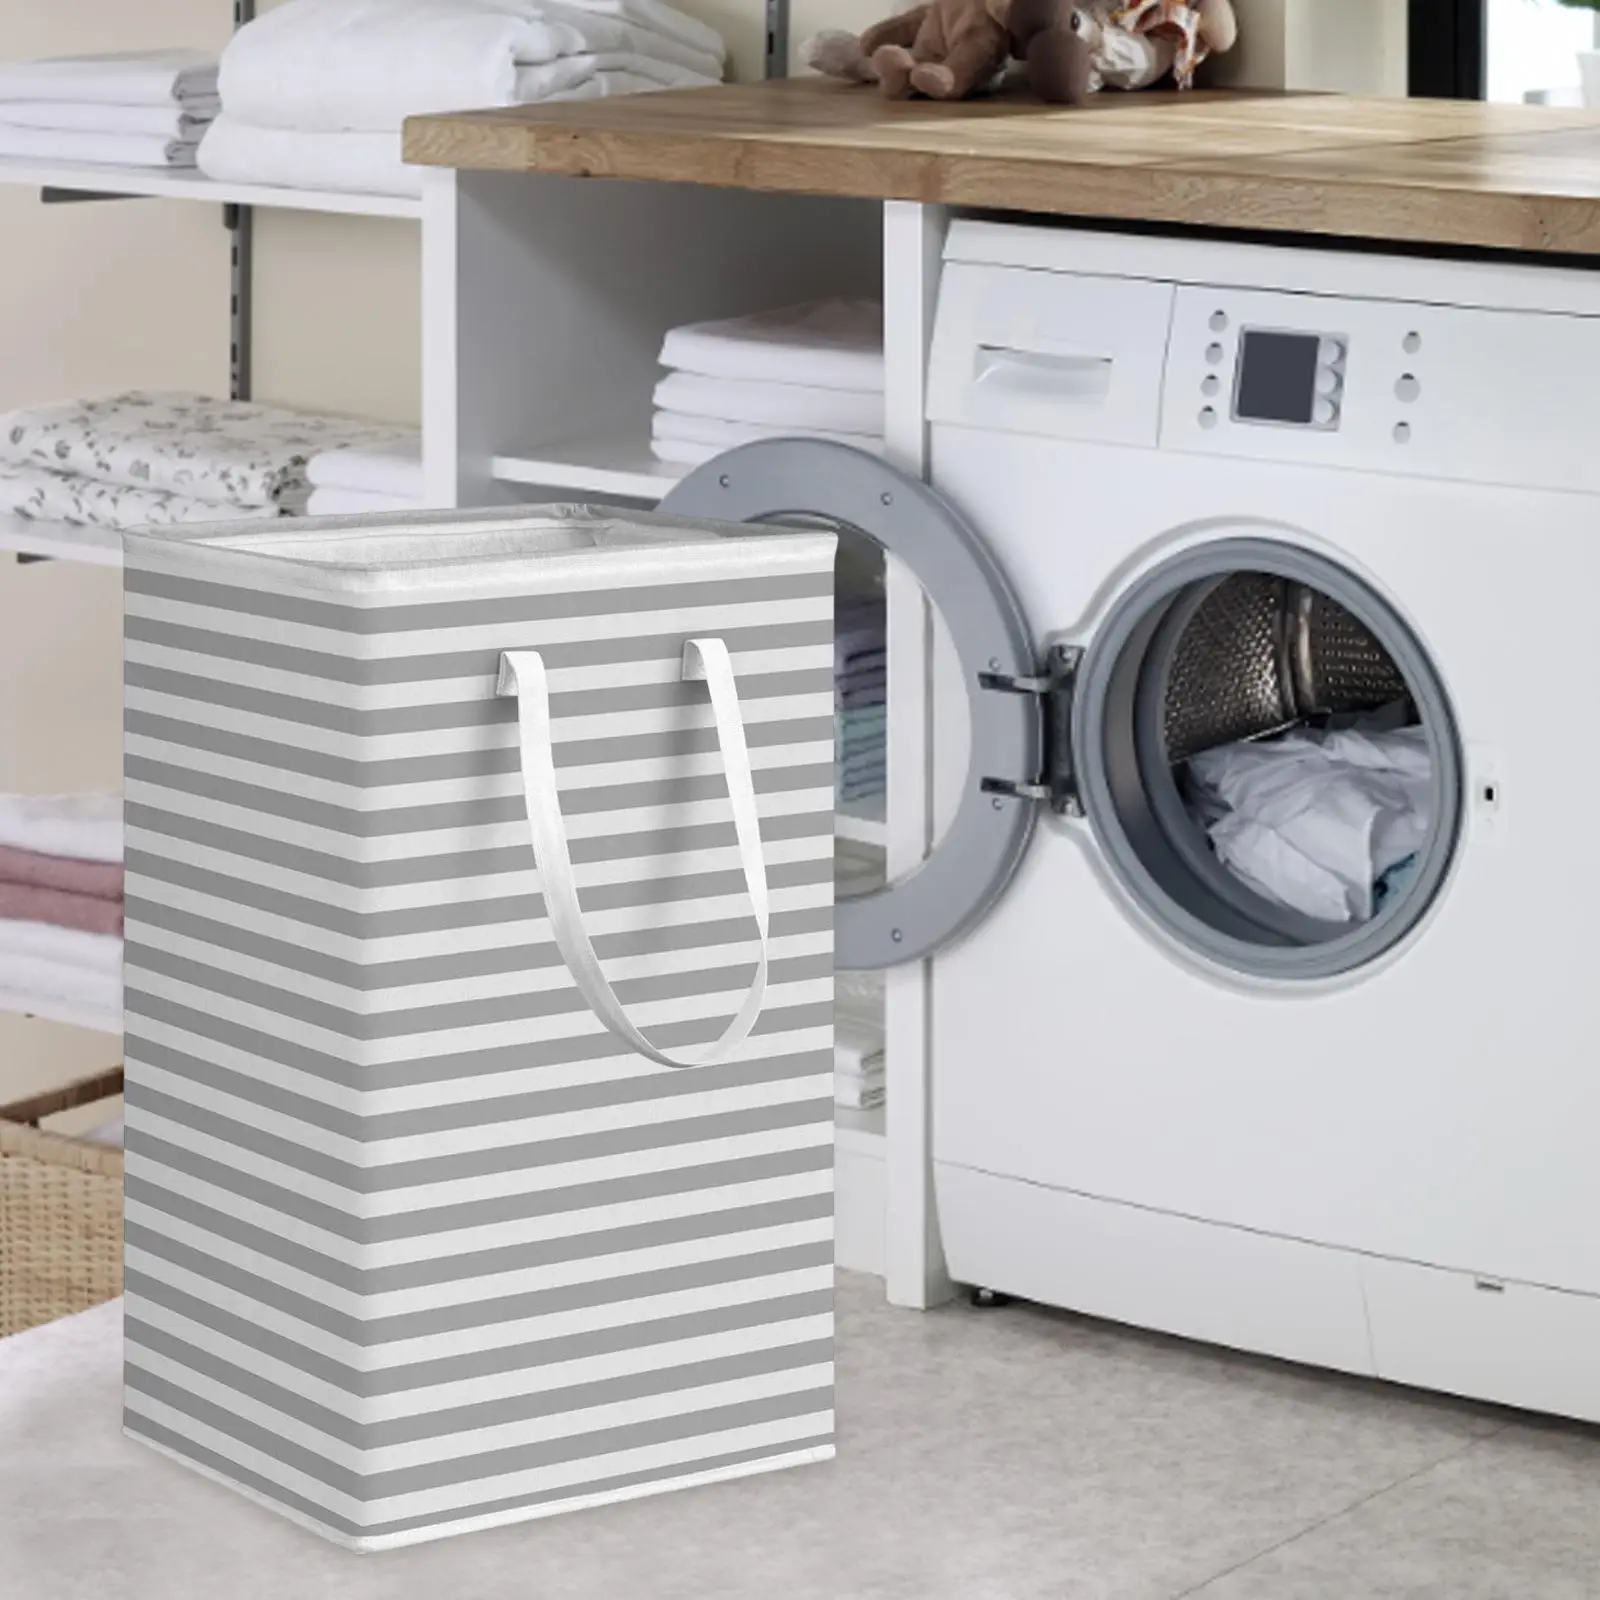 75L Collapsible Large Laundry Basket Dirty Clothes Laundry Basket for Bedroom Apartments